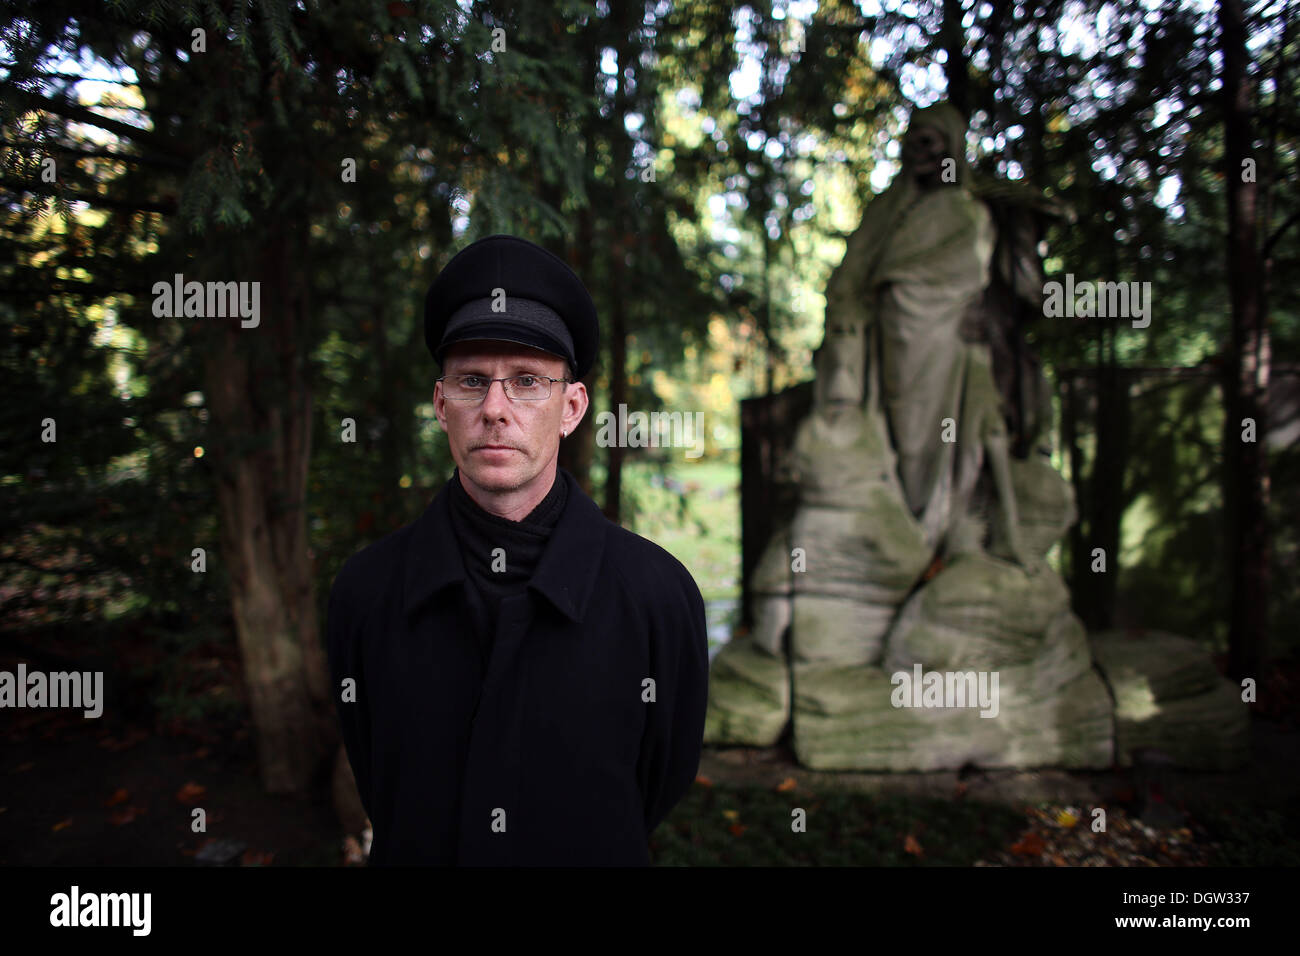 Cologne, Germany. 21st Oct, 2013. The Gravedigger Michael Roth stands in front of a grave with the 'Grim Reaper' on the Melatenfriedhof cemetery in Cologne, Germany, 21 October 2013. Photo: Oliver Berg/dpa/Alamy Live News Stock Photo